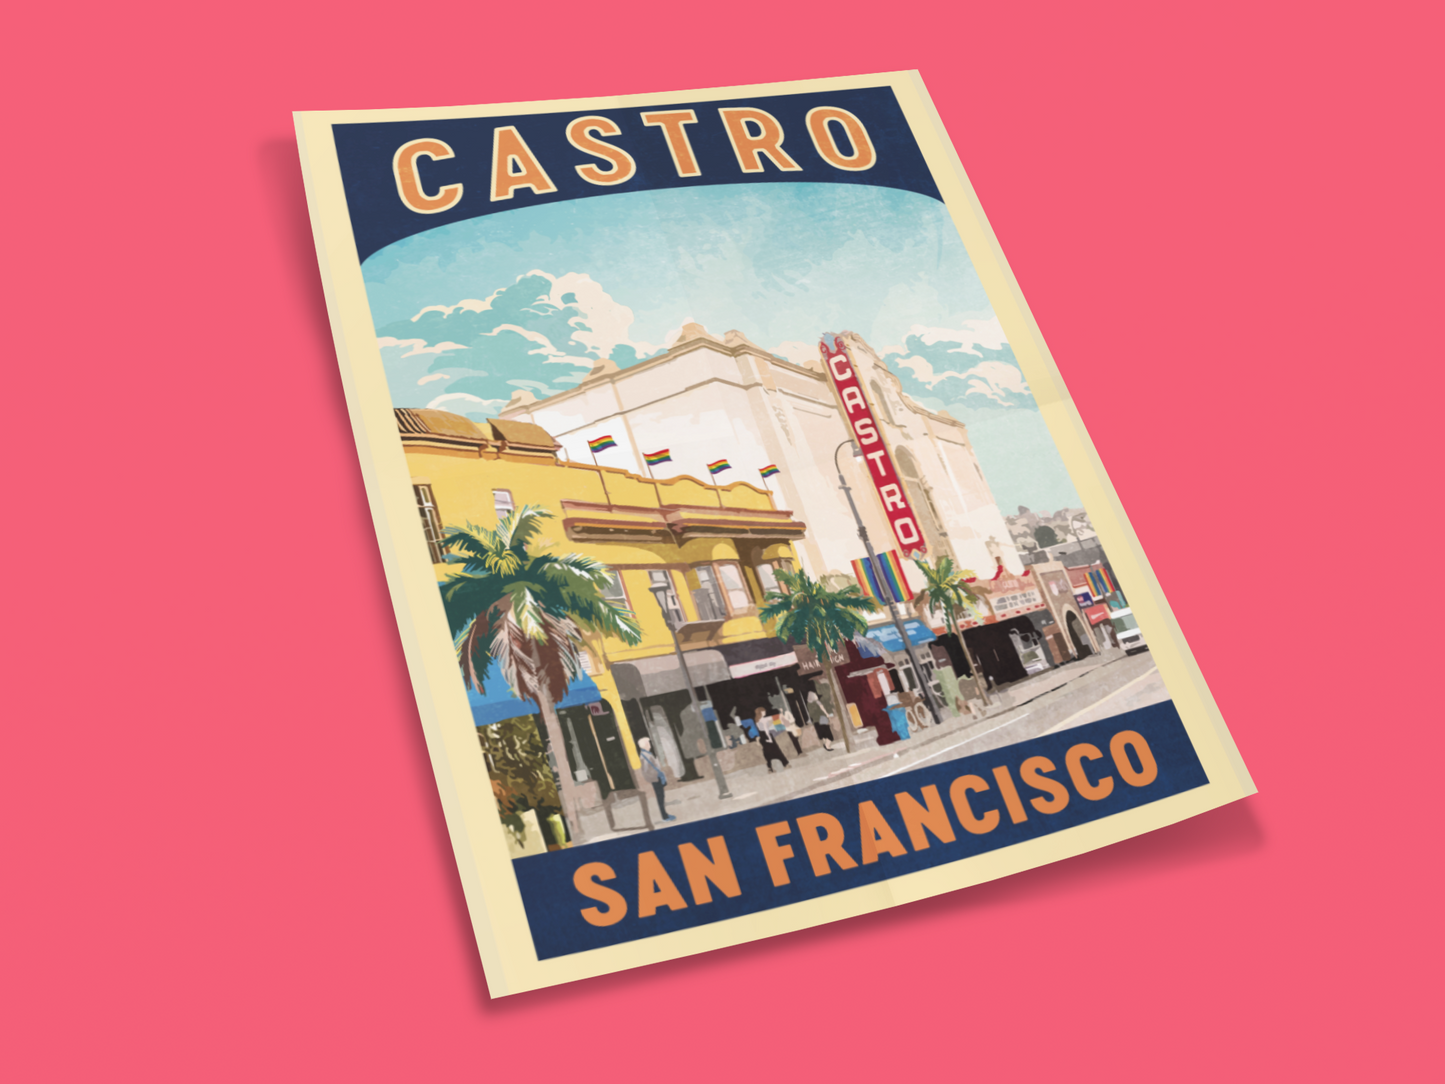 Castro San Francisco Art Posters SF Historical LGBTQ Poster Series 2 of 3 (Instant Download)